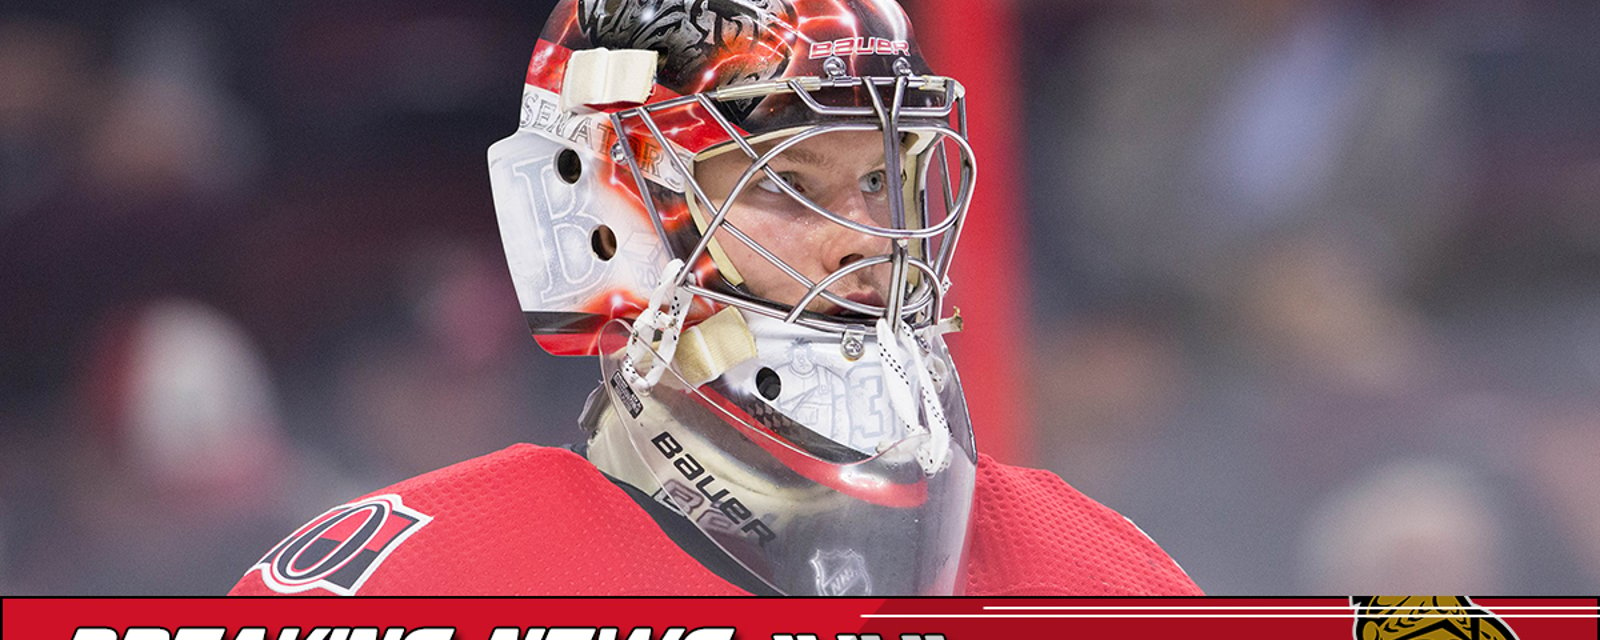 Breaking: Freak injury to Anderson forces Sens to call up Gustavsson